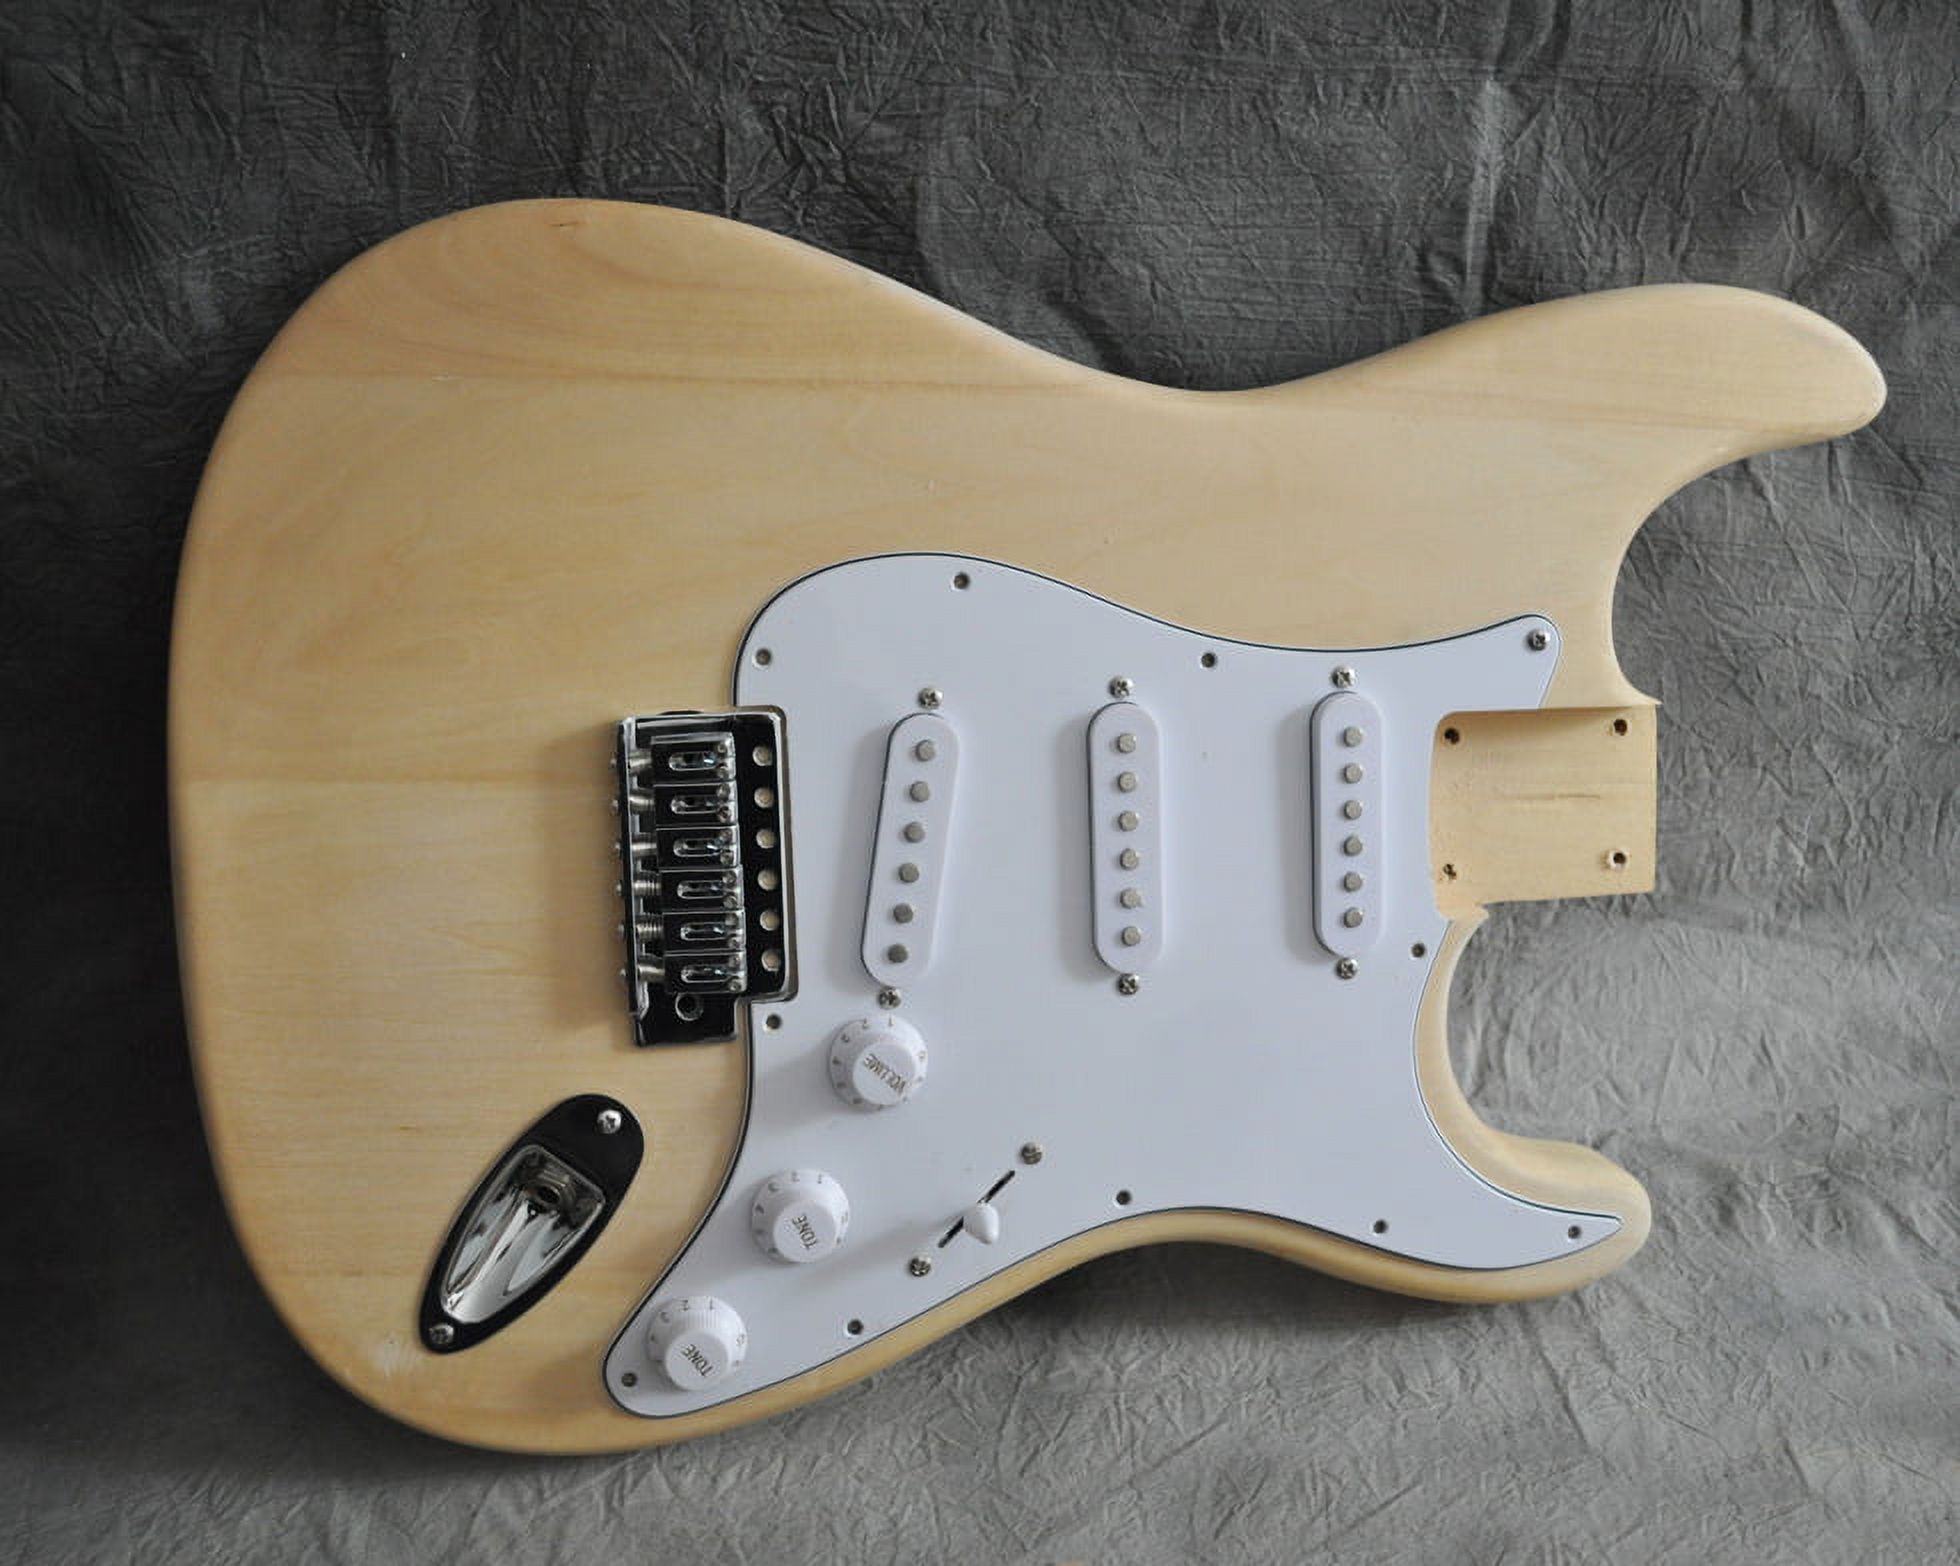 RSW DIY Electric Guitar kit with Basswood Body Maple Neck and Fingerboard 21 Frets S-S-S Pickups Bolt On - image 2 of 6